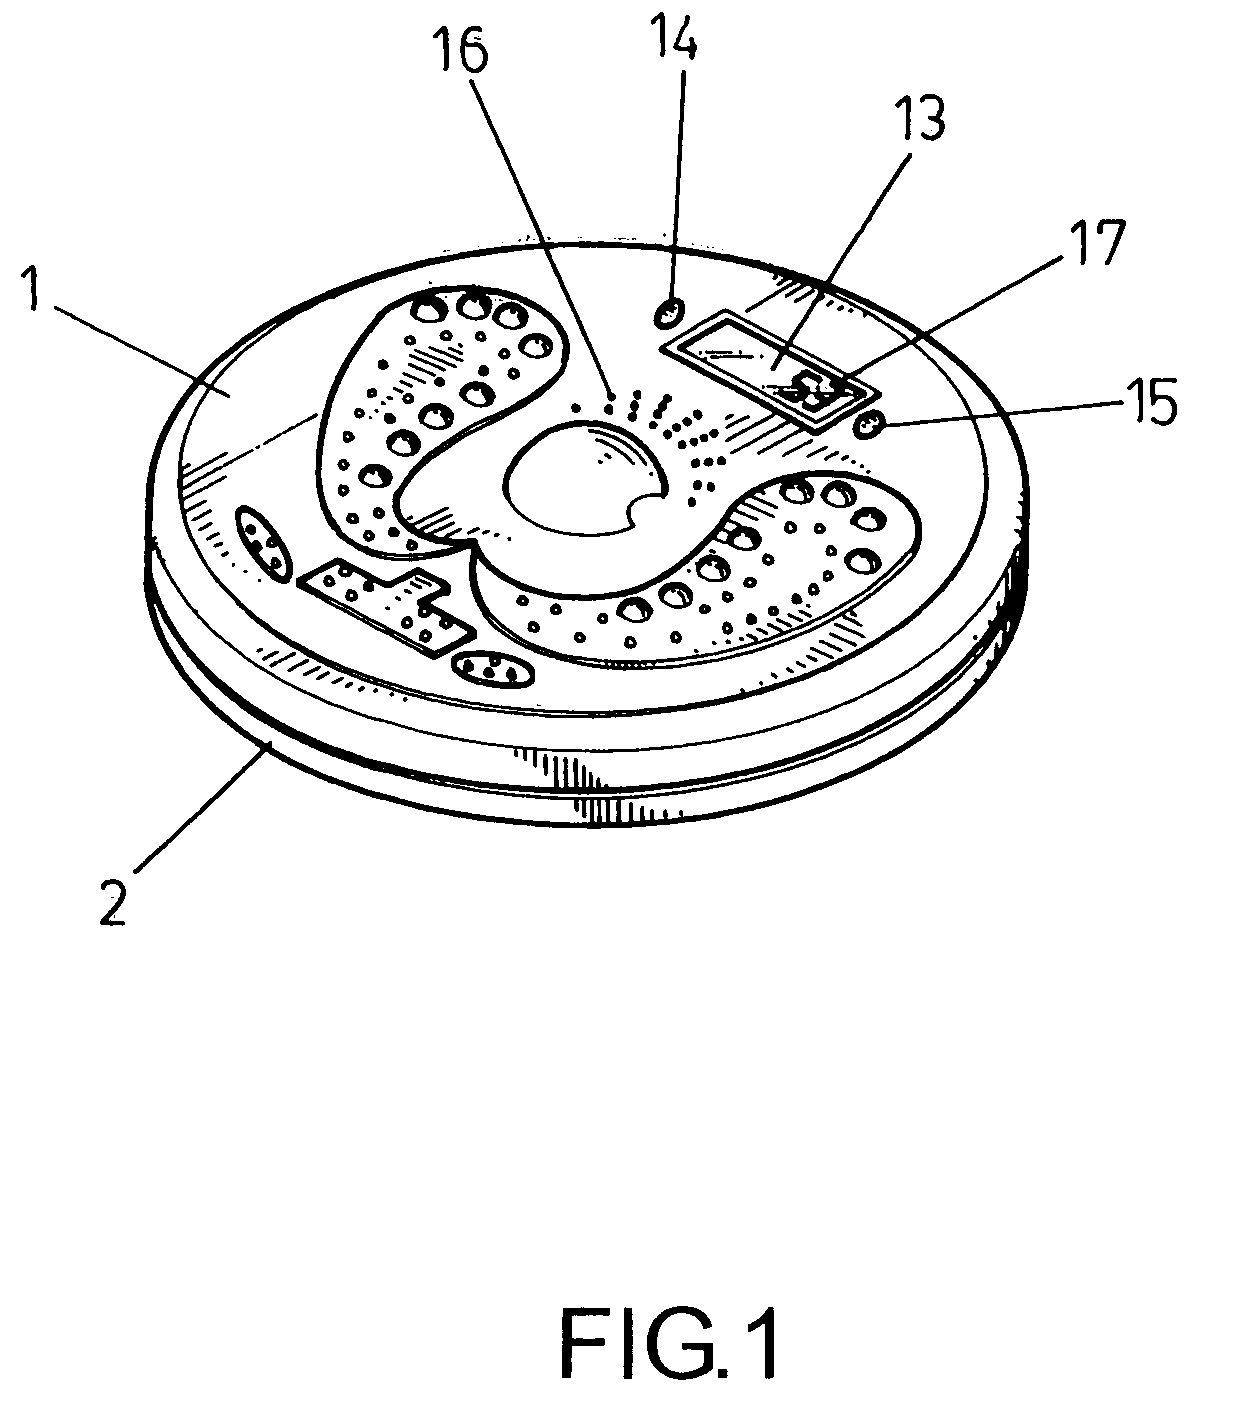 Twist disc having display capability and sound vocalization to inform status of an exercise routine